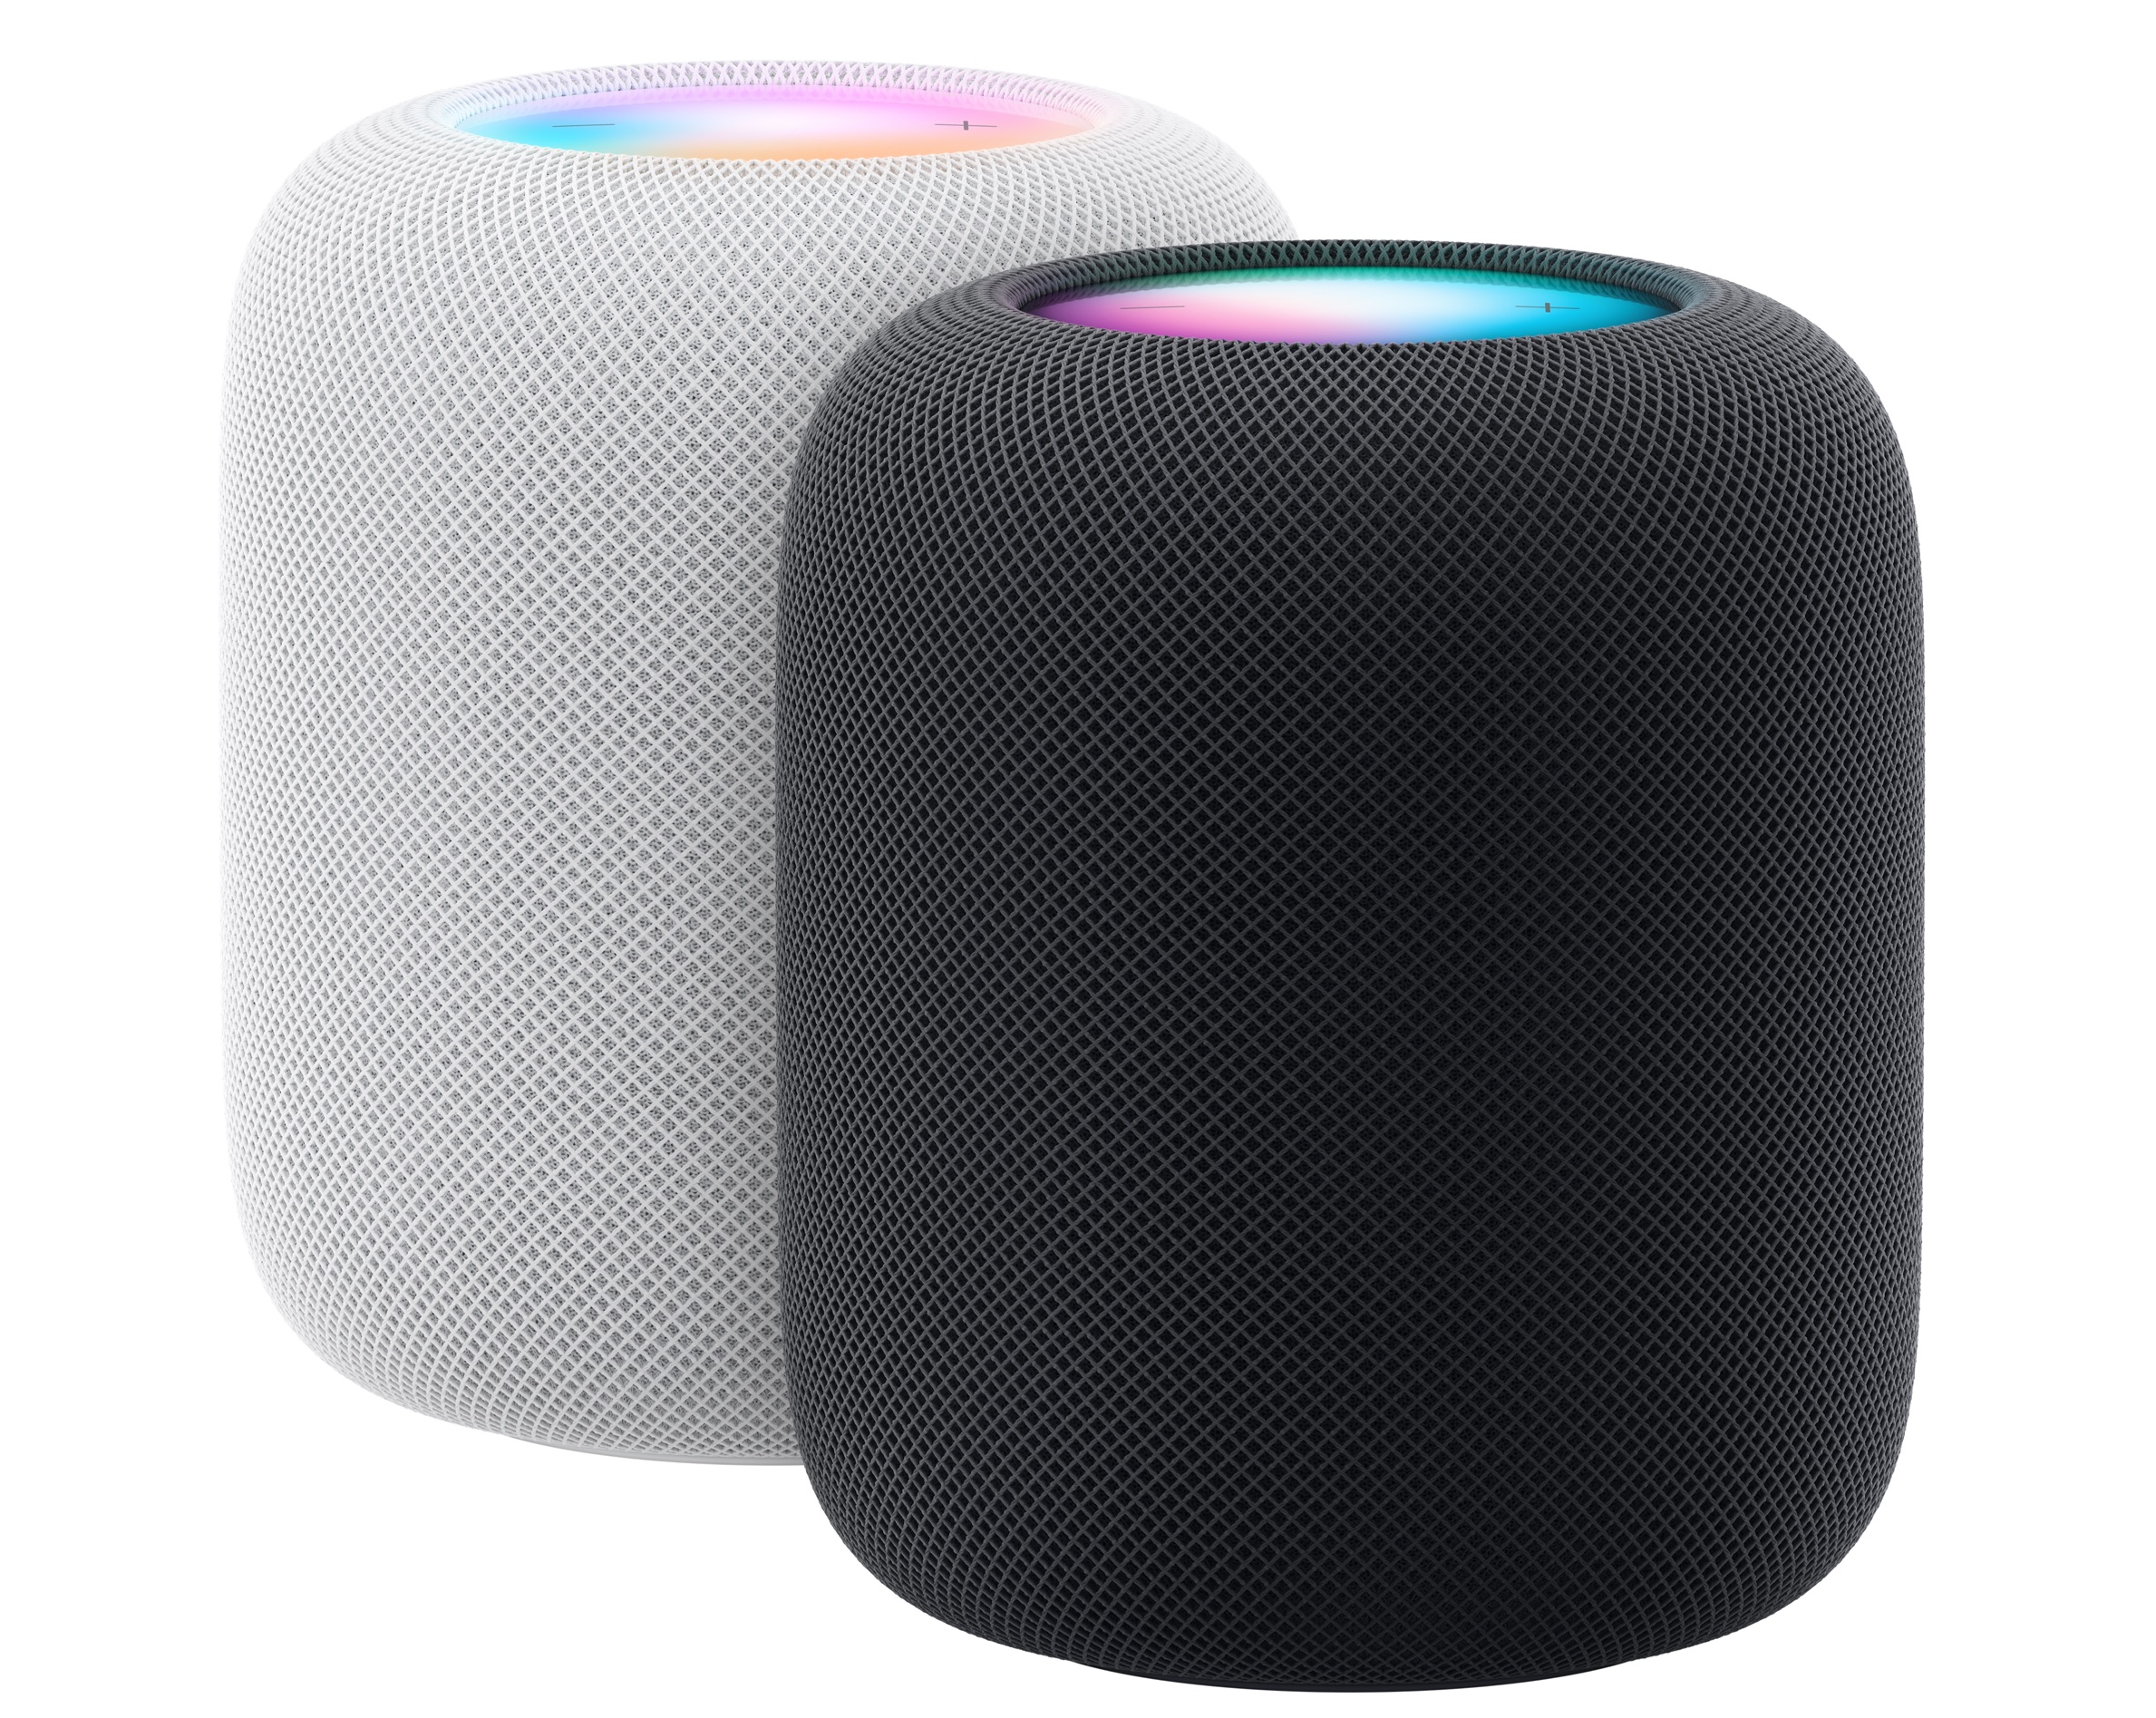 HomePod from Apple (2nd generation)